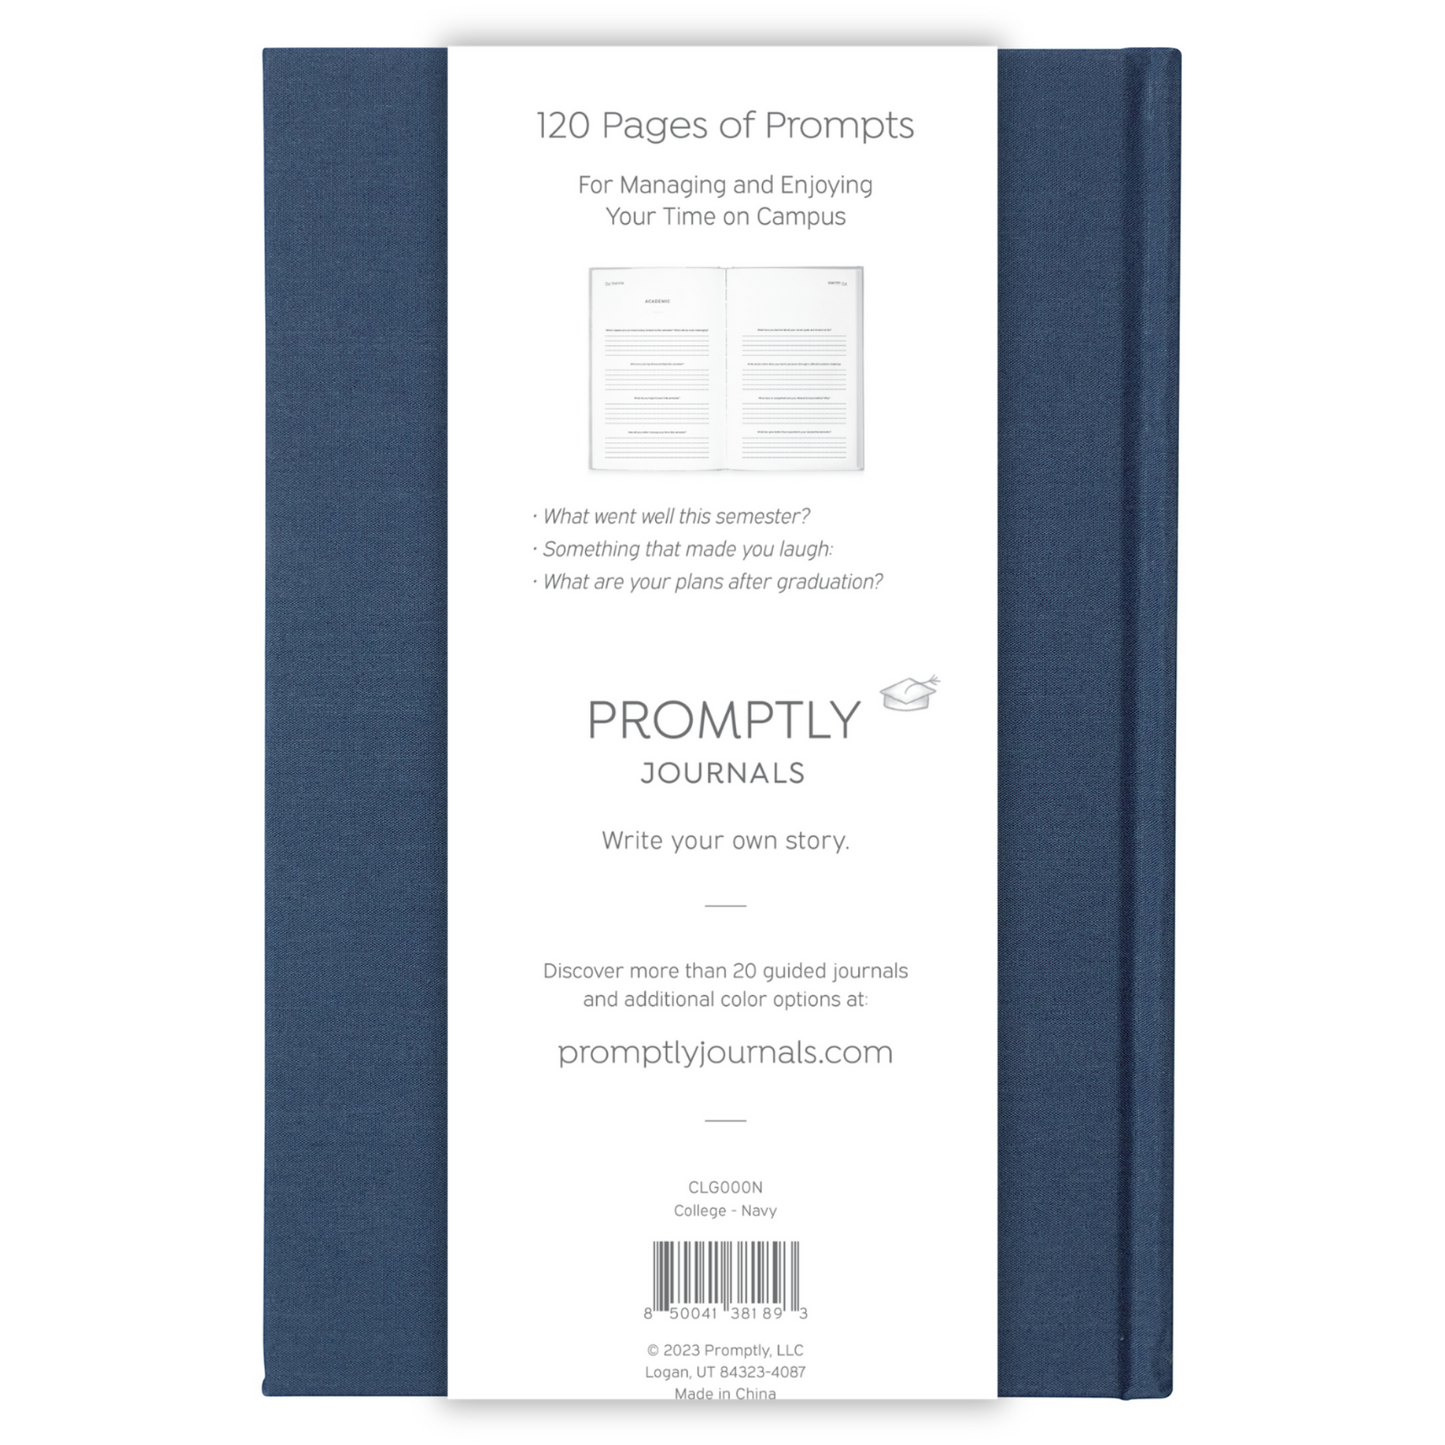 My College Journal: From First Day to Graduation (Navy) by Promptly Journals